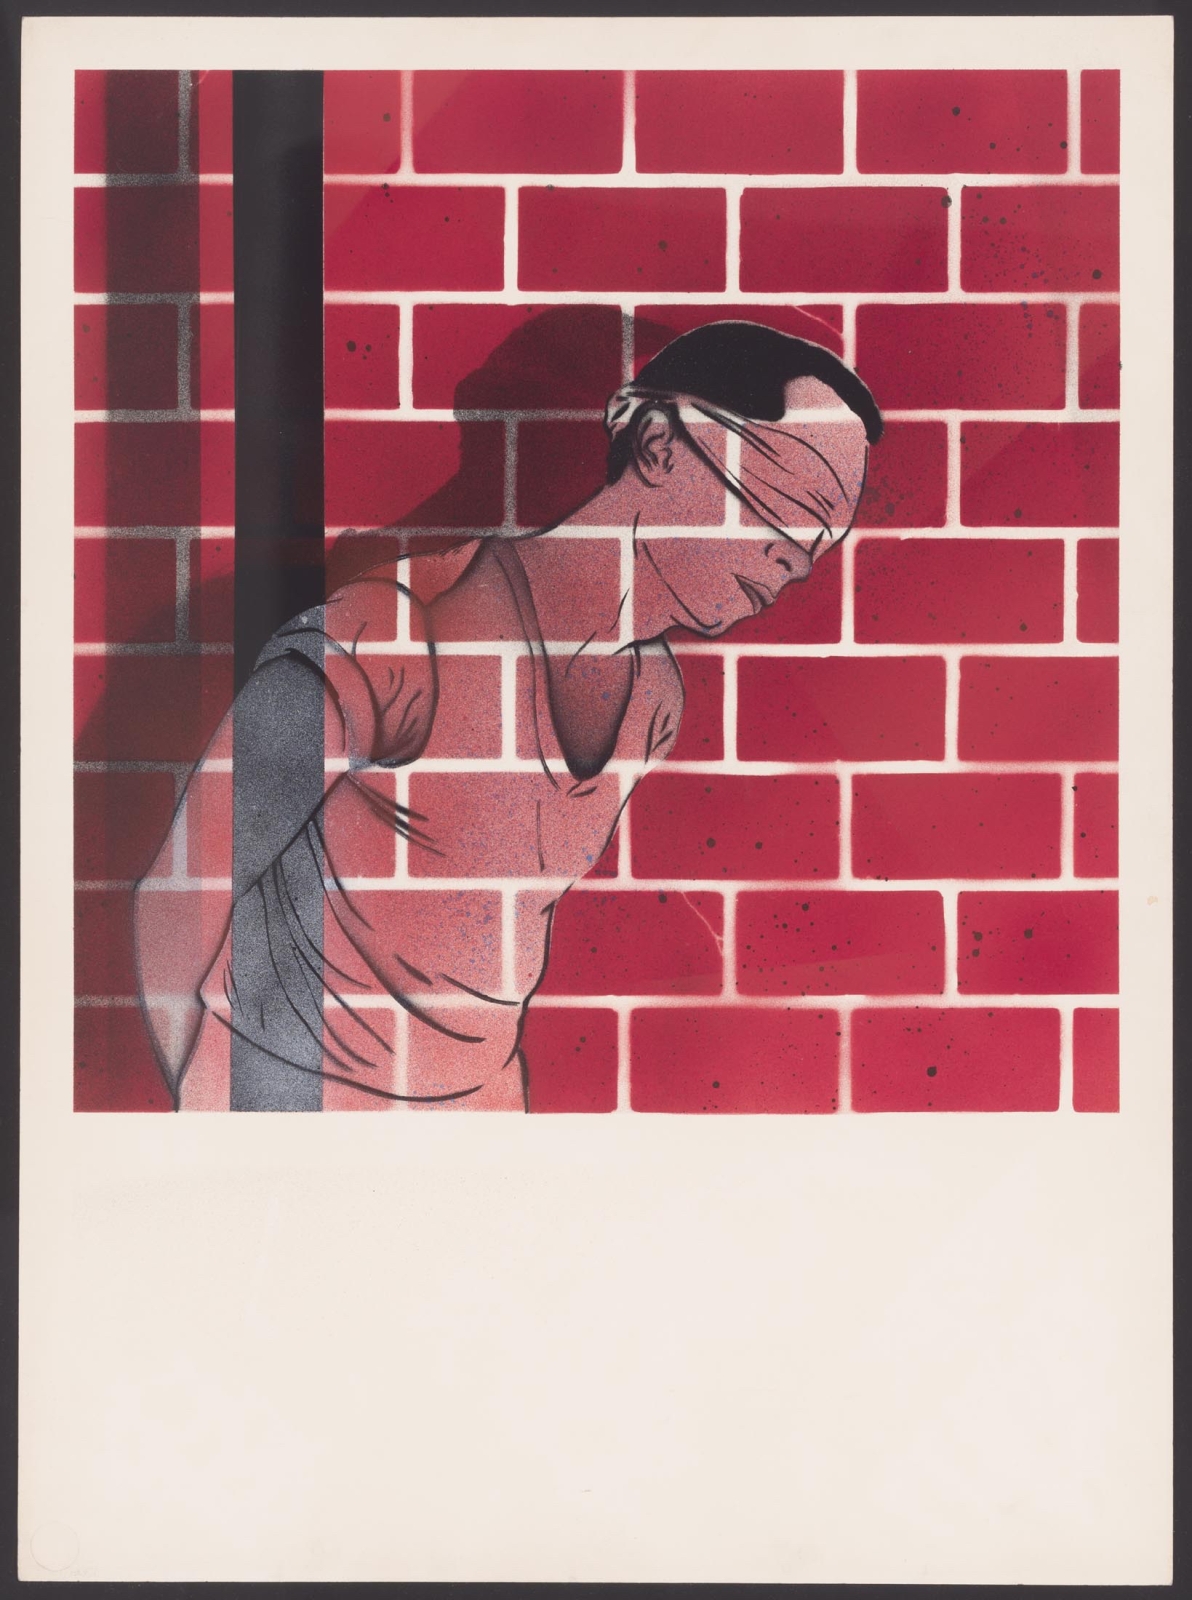 David Wojnarowicz
Firing Squad Figure / Brick Wall, 1982
titled, dated, signed on verso
spraypaint on paper
30 x 22 in.
76.2 x 55.88 cm